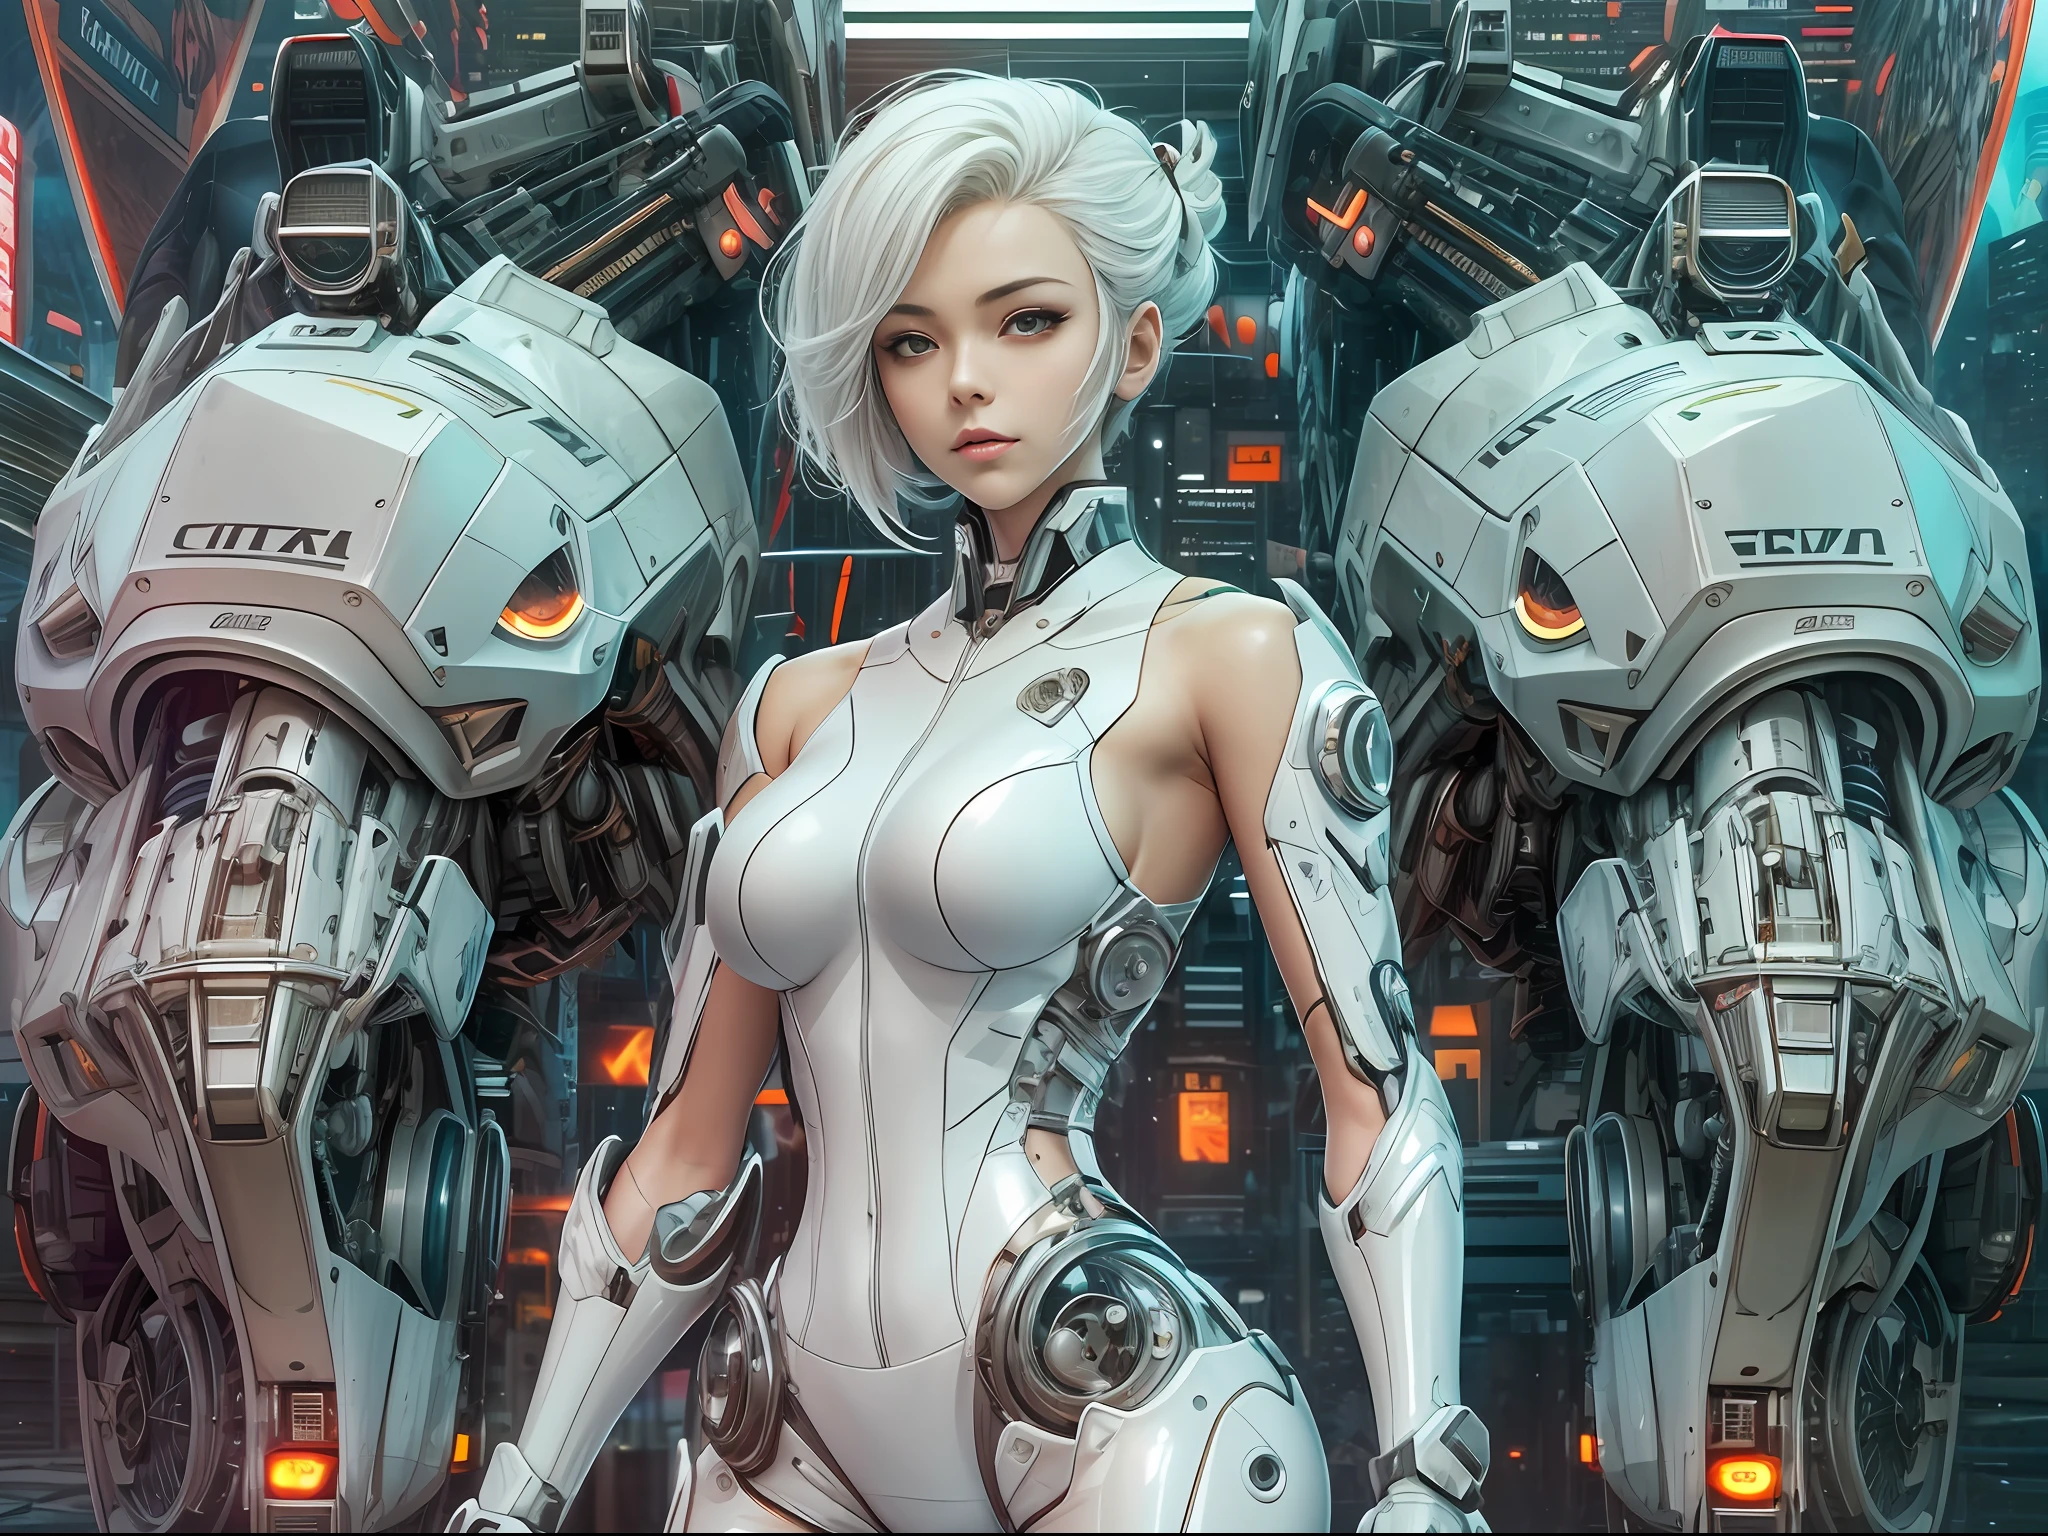 masutepiece, hightquality, hight resolution, high textured, 8K, HighDynamicRange, Robot girl in sexy costume, Huge breasts, White transparent tights, mechs, short white hair, Mechanical prosthetics, mechanical legs, dishevled hair、Detailed skin、Fine-grained skin、Large Motorcycles, Riding Bicycles, natta, cyberpunkcity